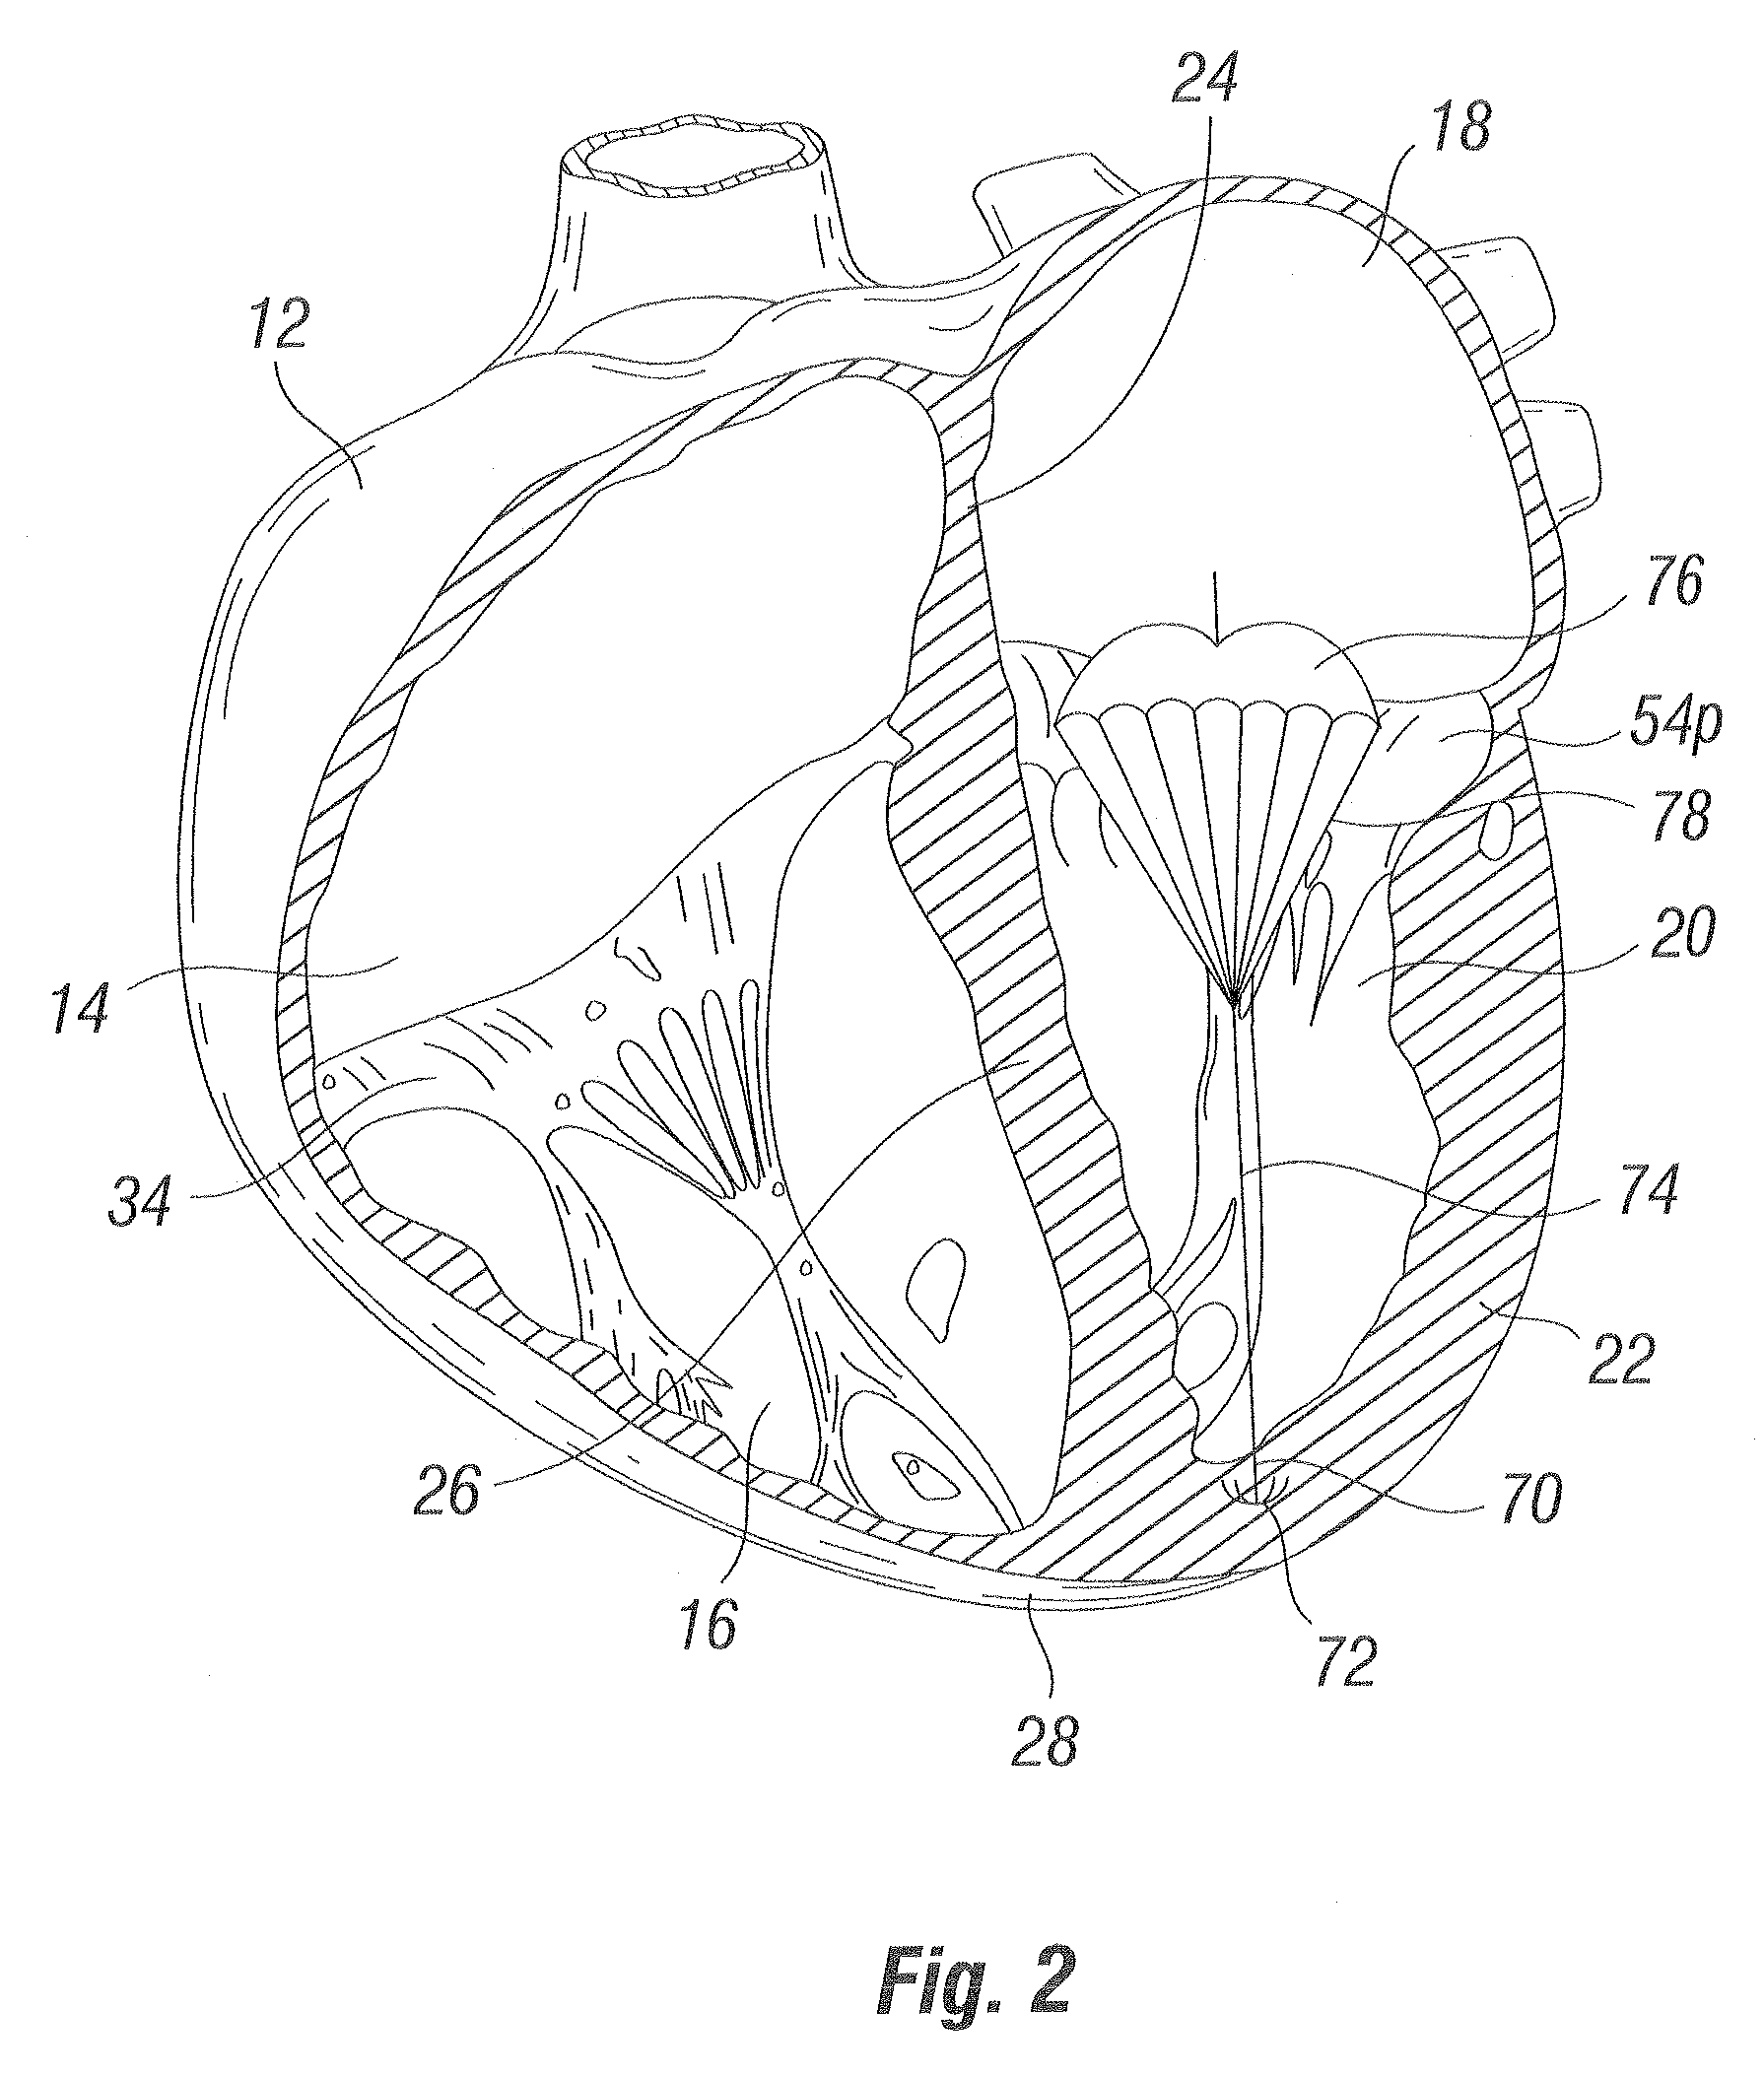 Device and method for improving heart valve function